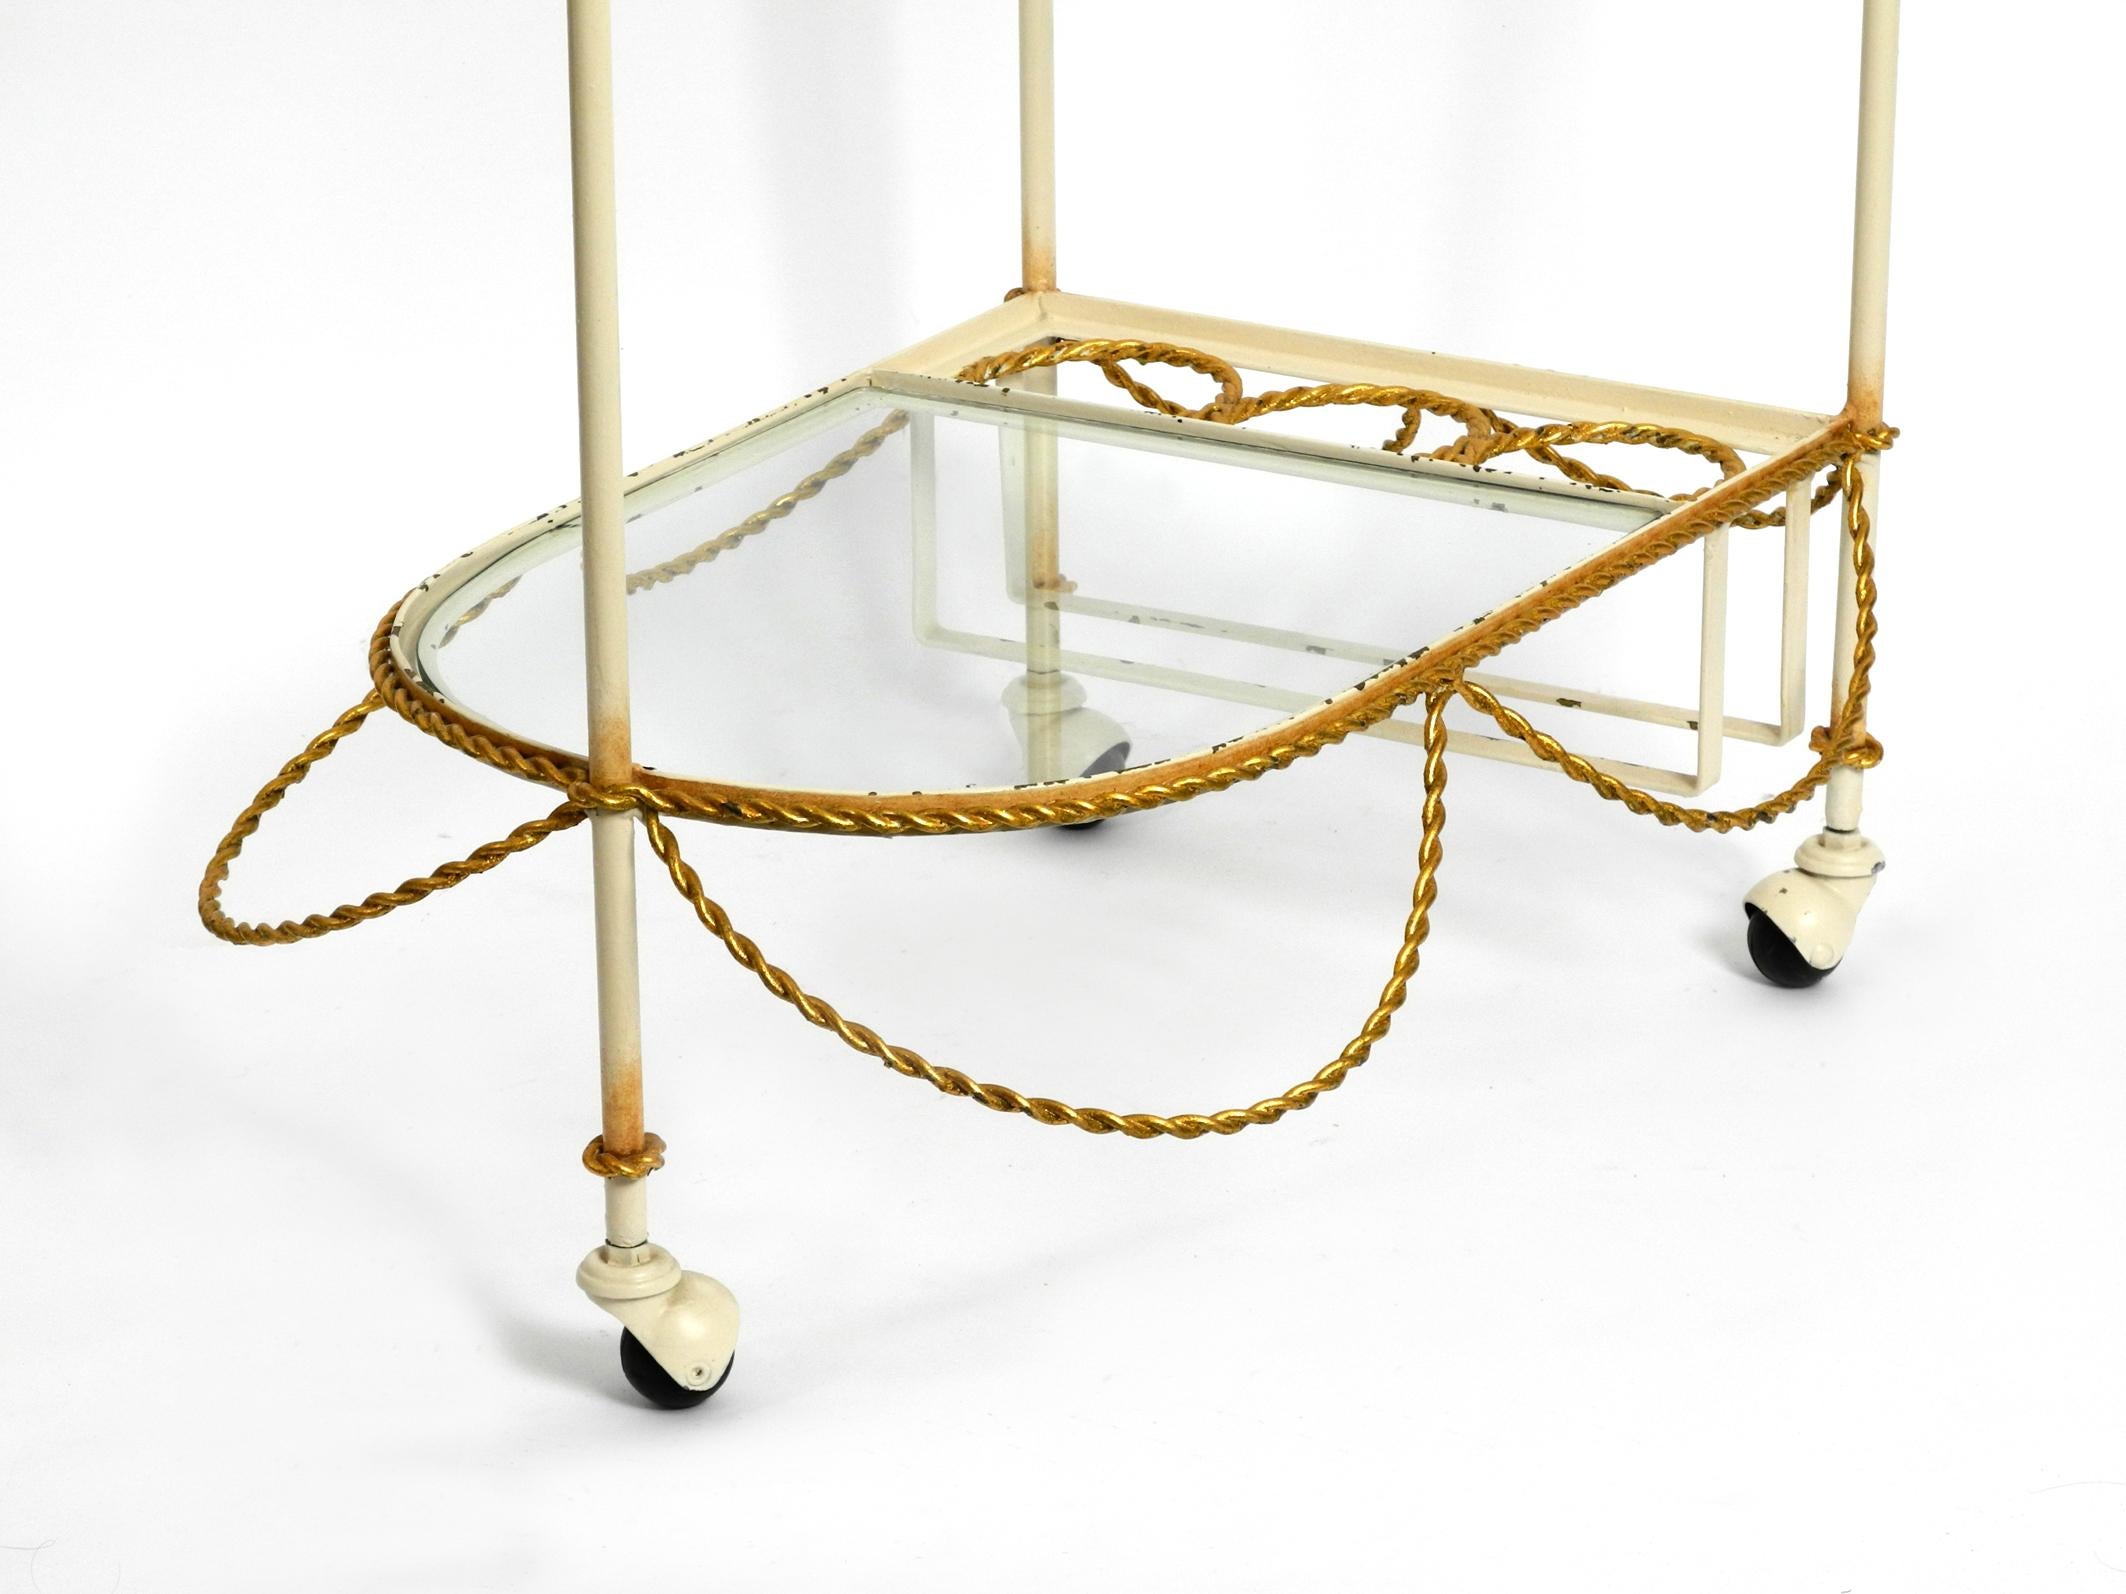 Italian Midcentury Bar Cart Made of Metal in Beige and Gold with Glass Elements For Sale 8